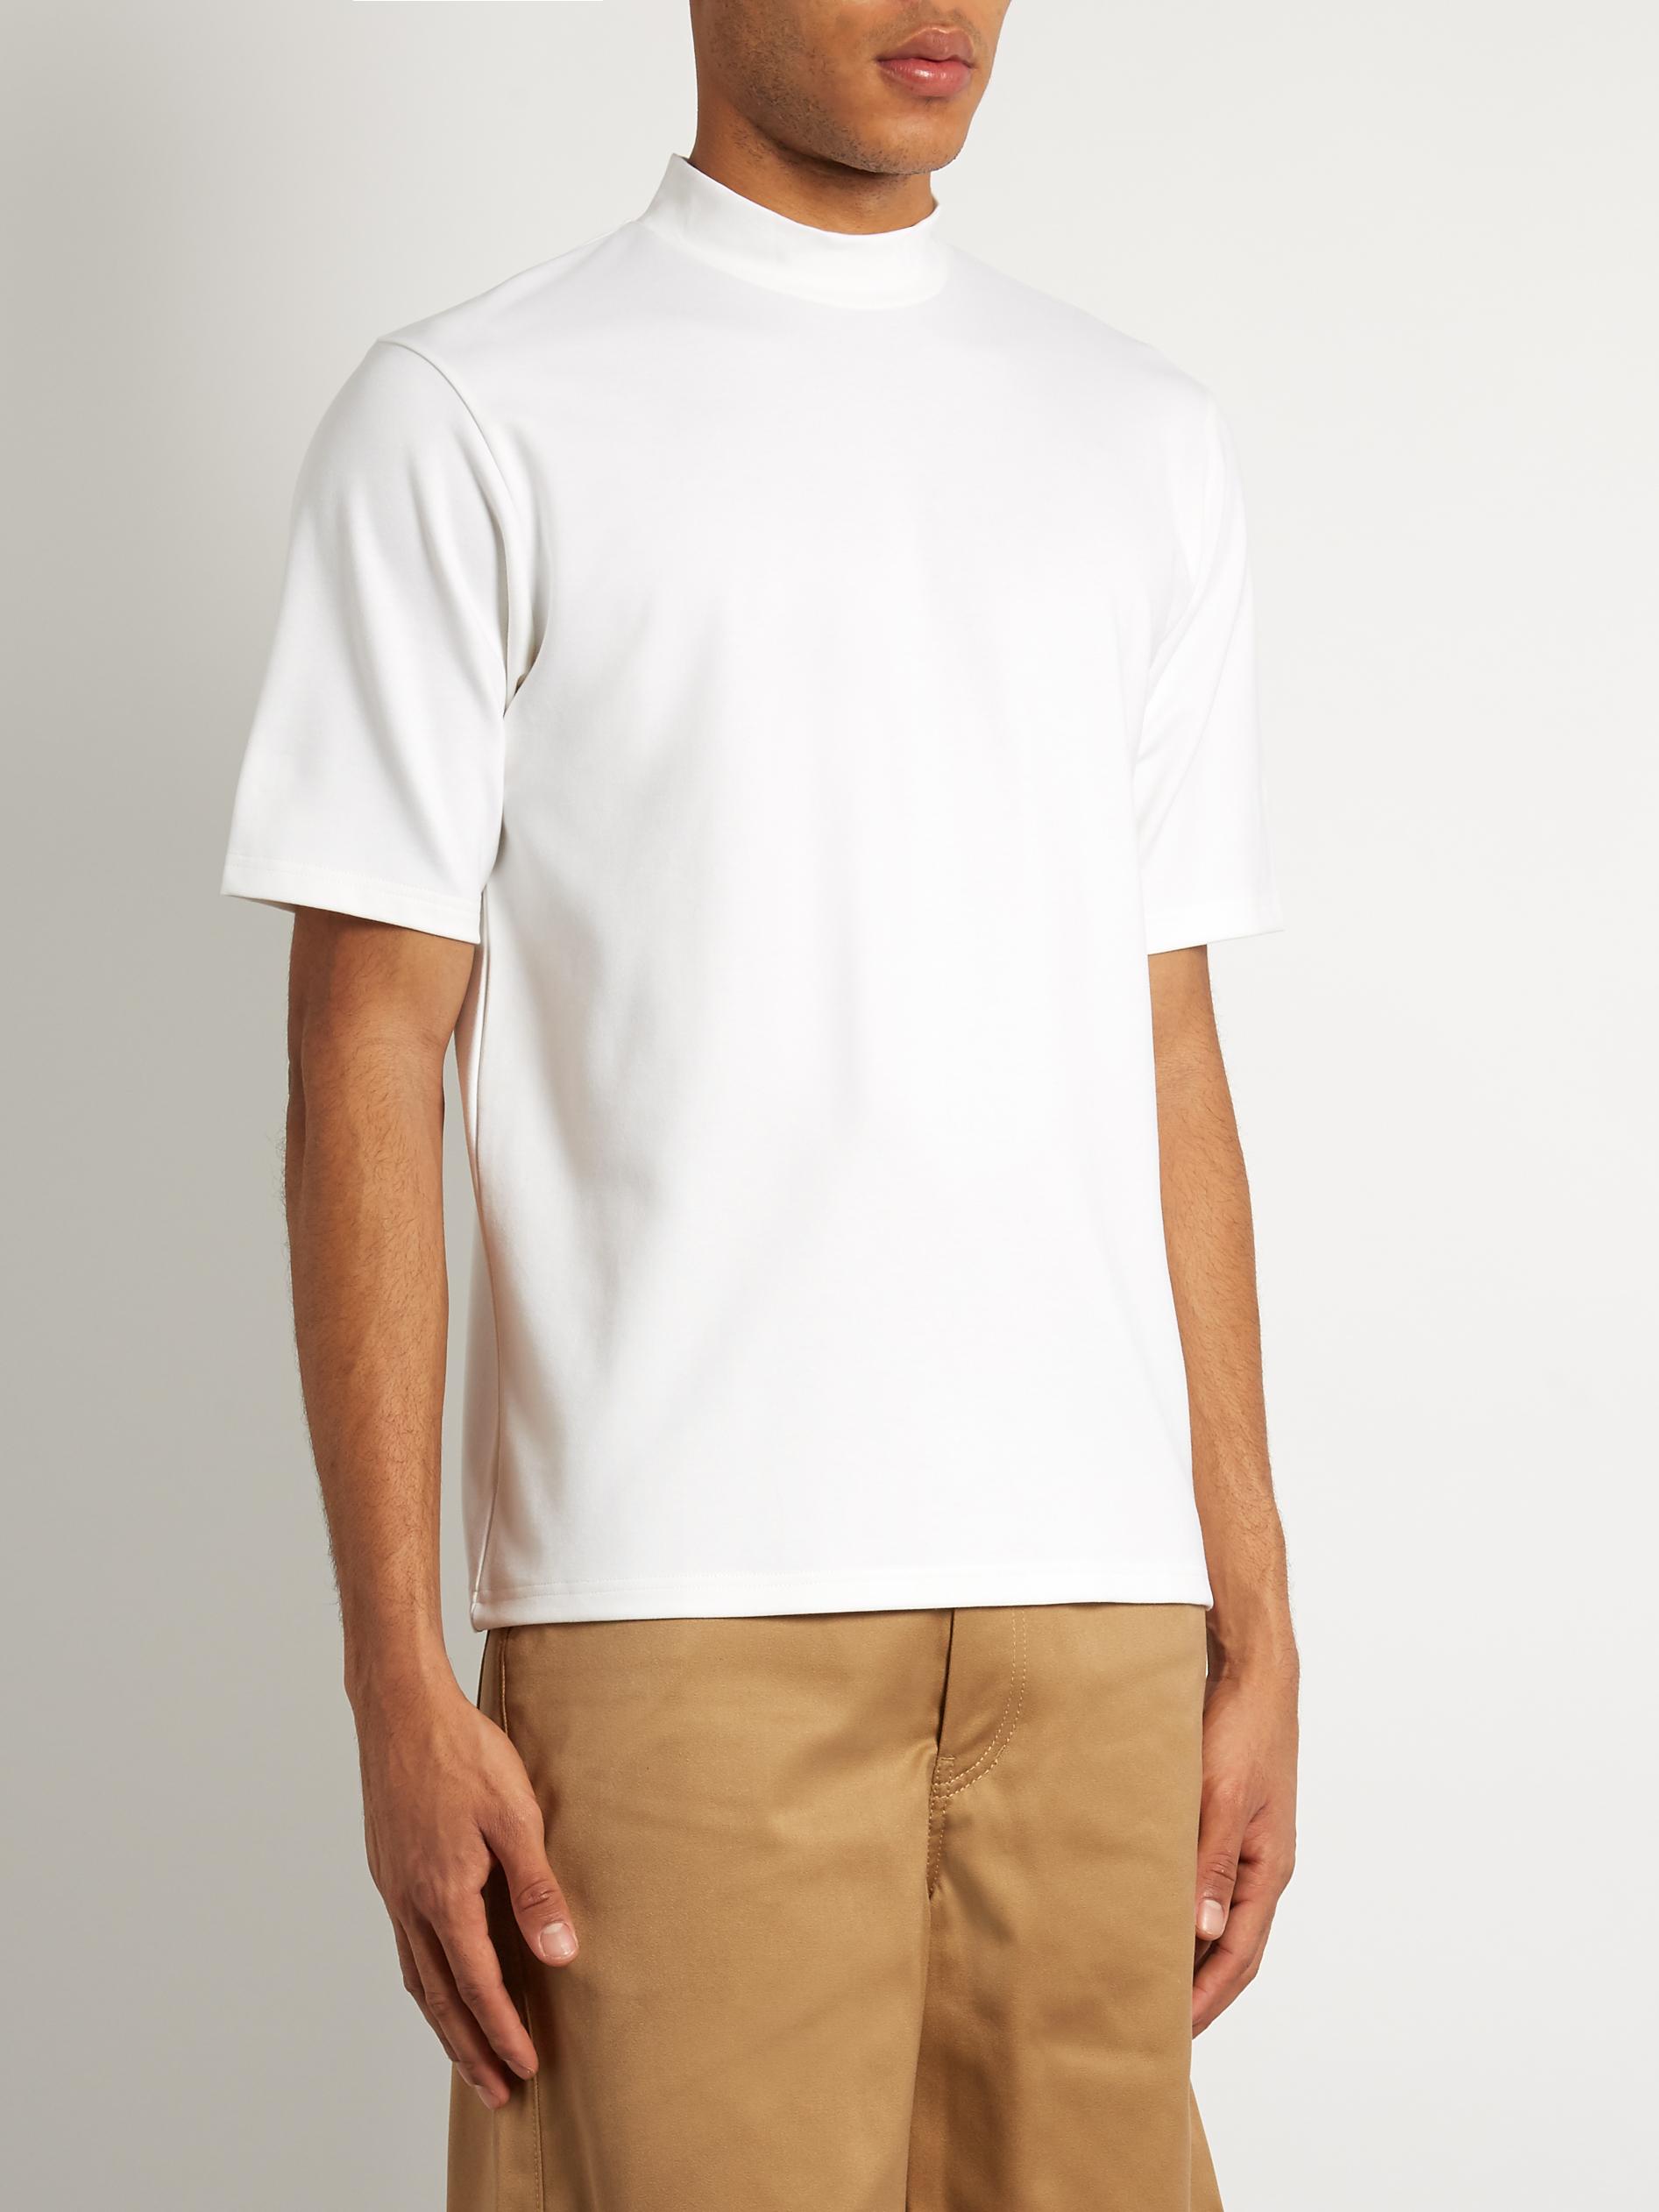 Acne Studios Synthetic Fons High-neck Jersey T-shirt in White for Men ...